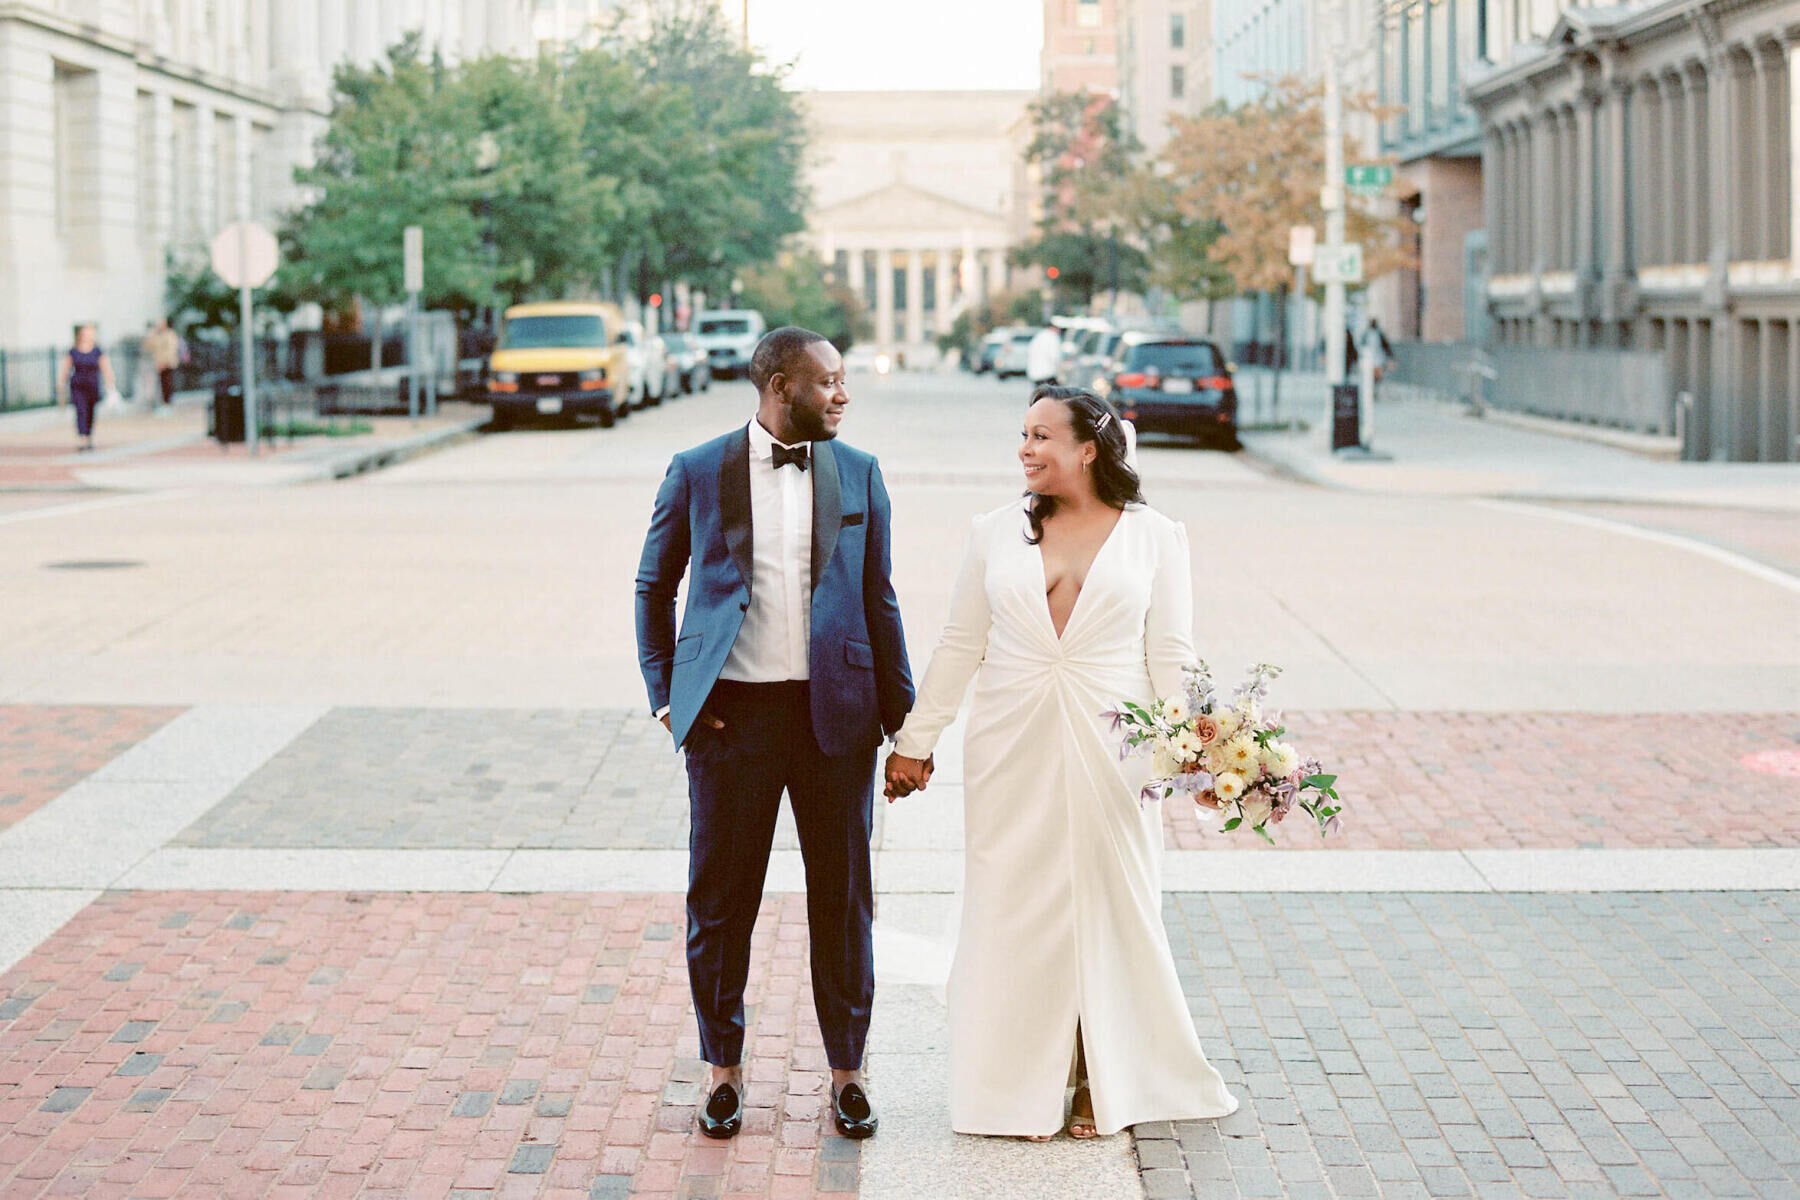 Elopement Wedding: A groom and bride make eye contact during portraits on the streets of Washington DC.